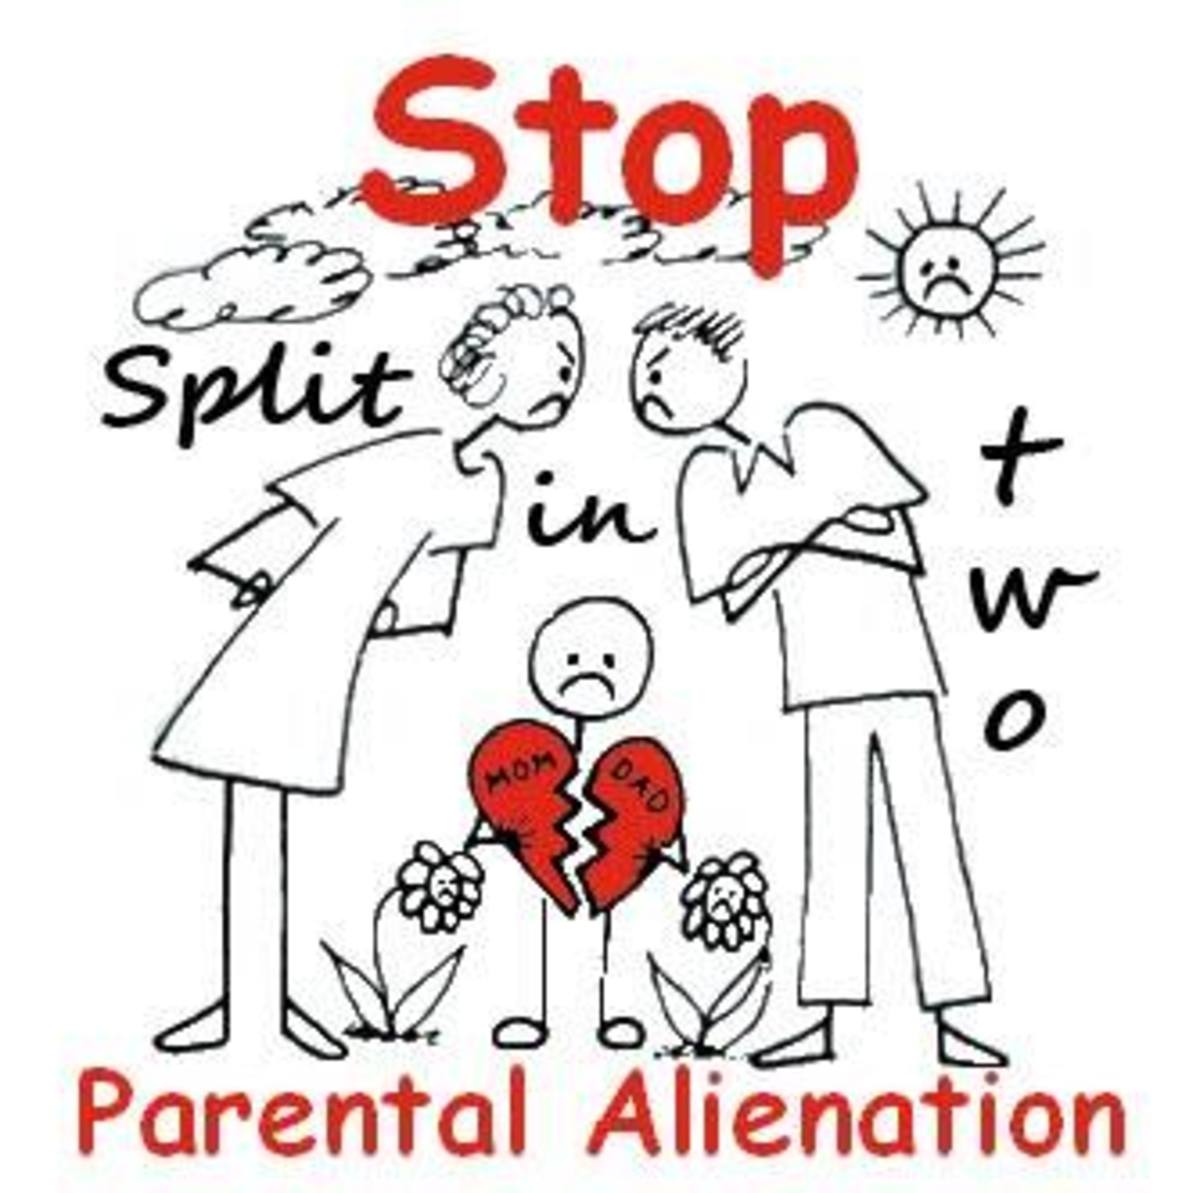 What is Parental Alienation Syndrome?